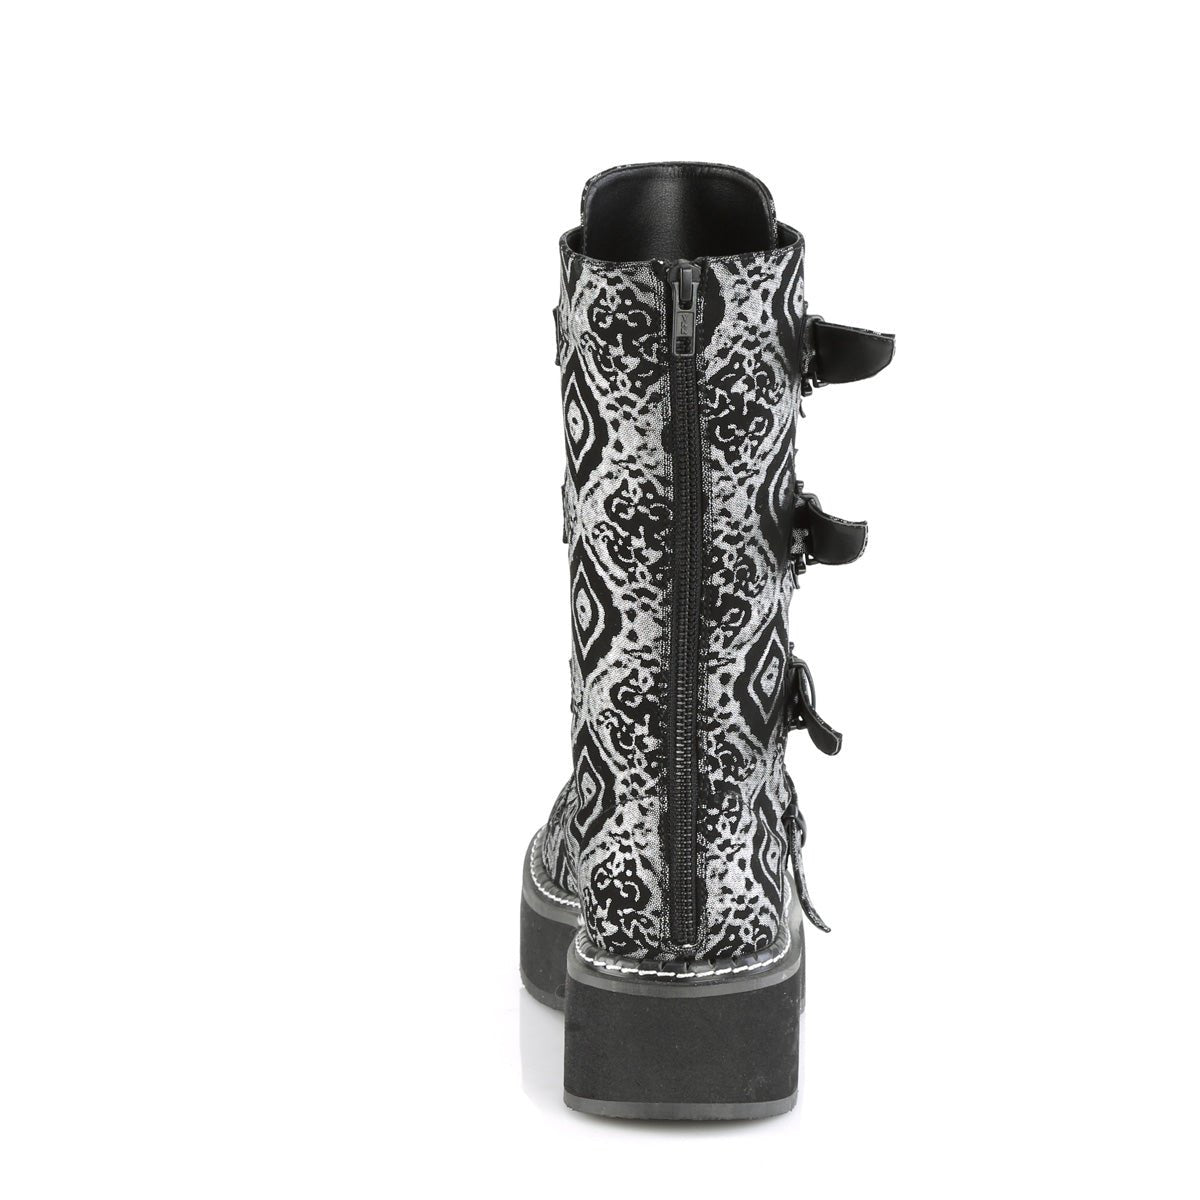 Too Fast | Demonia Emily 322 | Black & Silver Faux Nubuck Leather Women's Mid Calf Boots